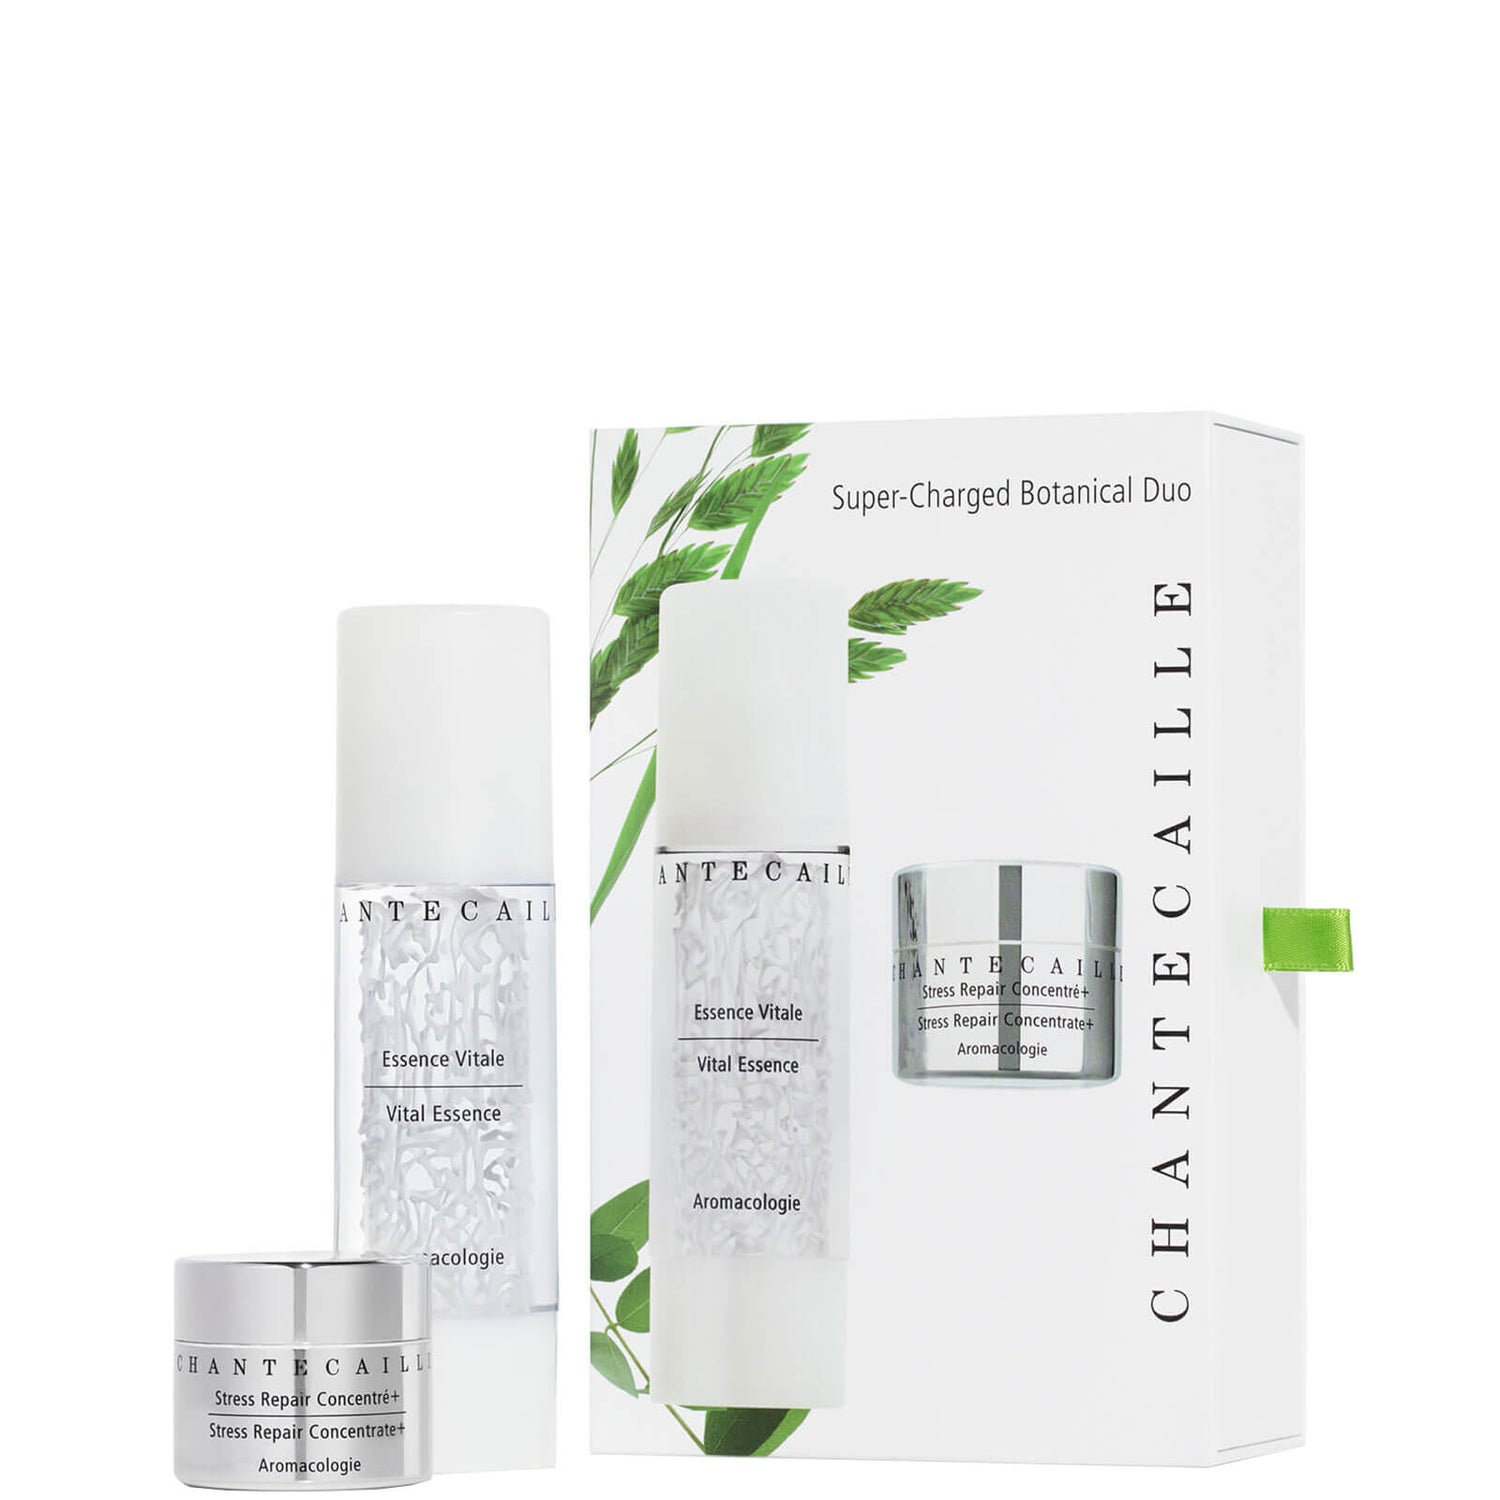 Coffret Super-Charged Botanical Duo Chantecaille